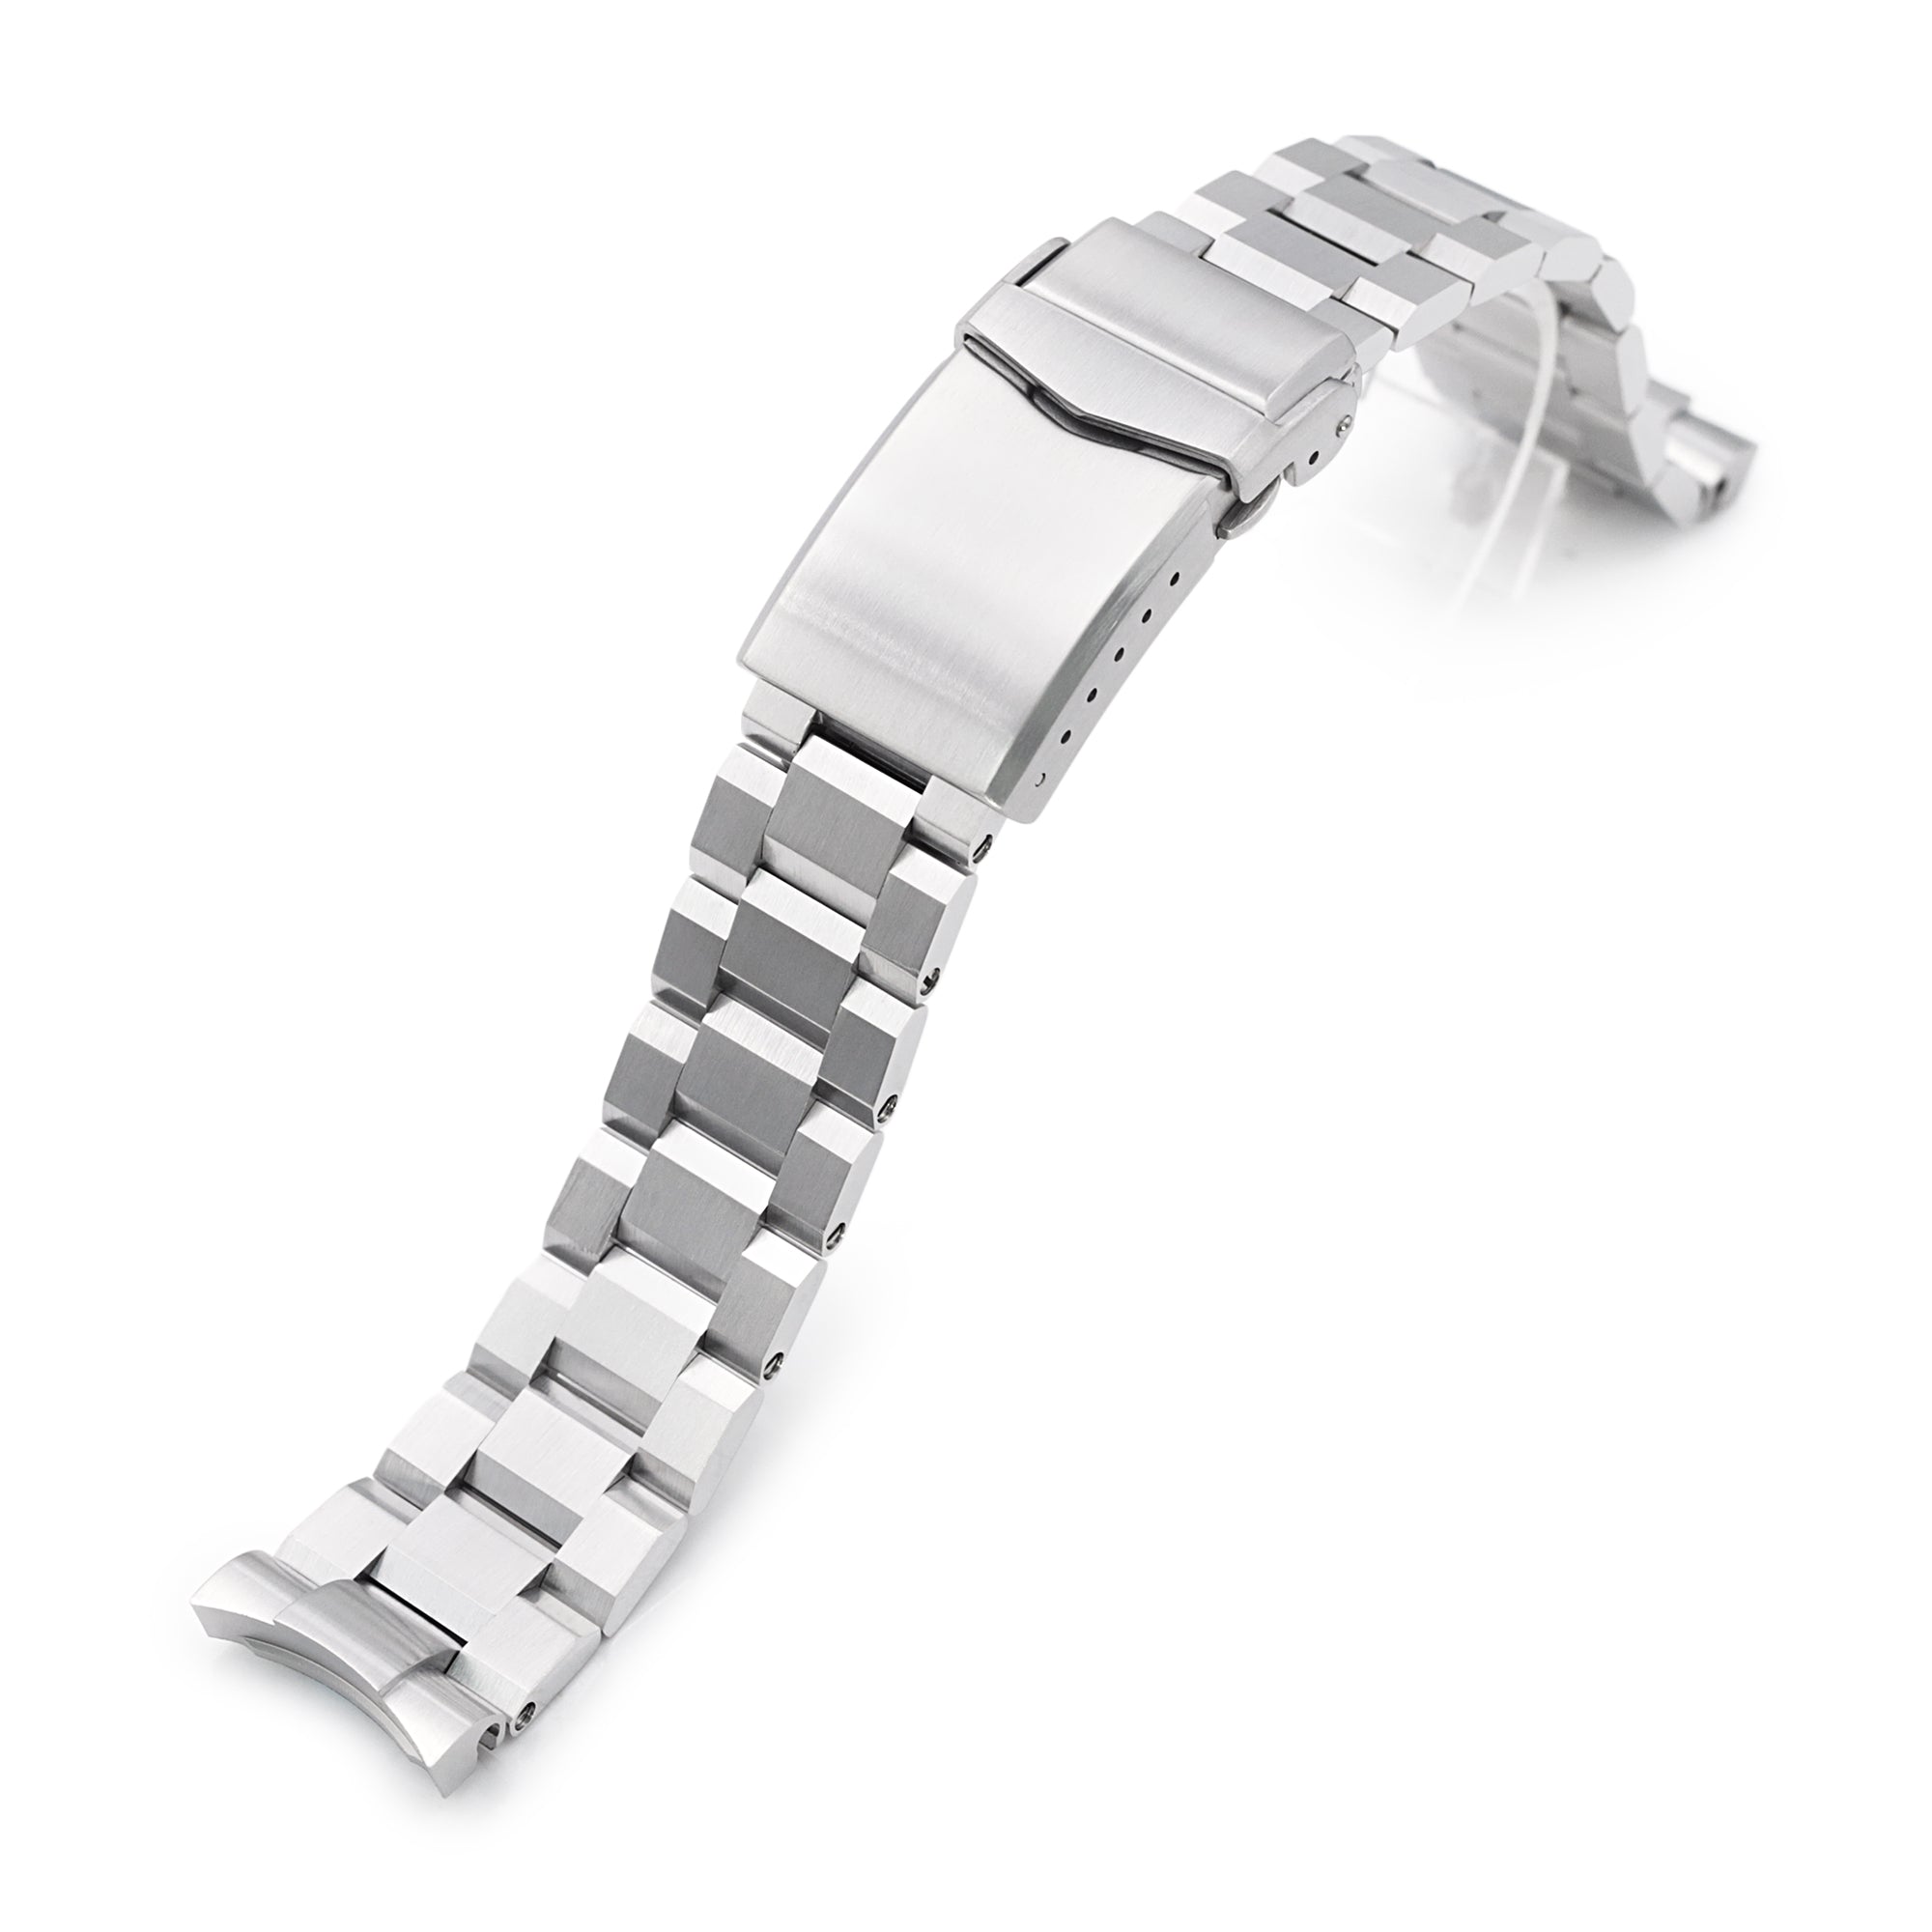 20mm Hexad III Watch Band for Omega Seamaster 42mm, 316L Stainless Steel Brushed V-Clasp Strapcode Watch Bands